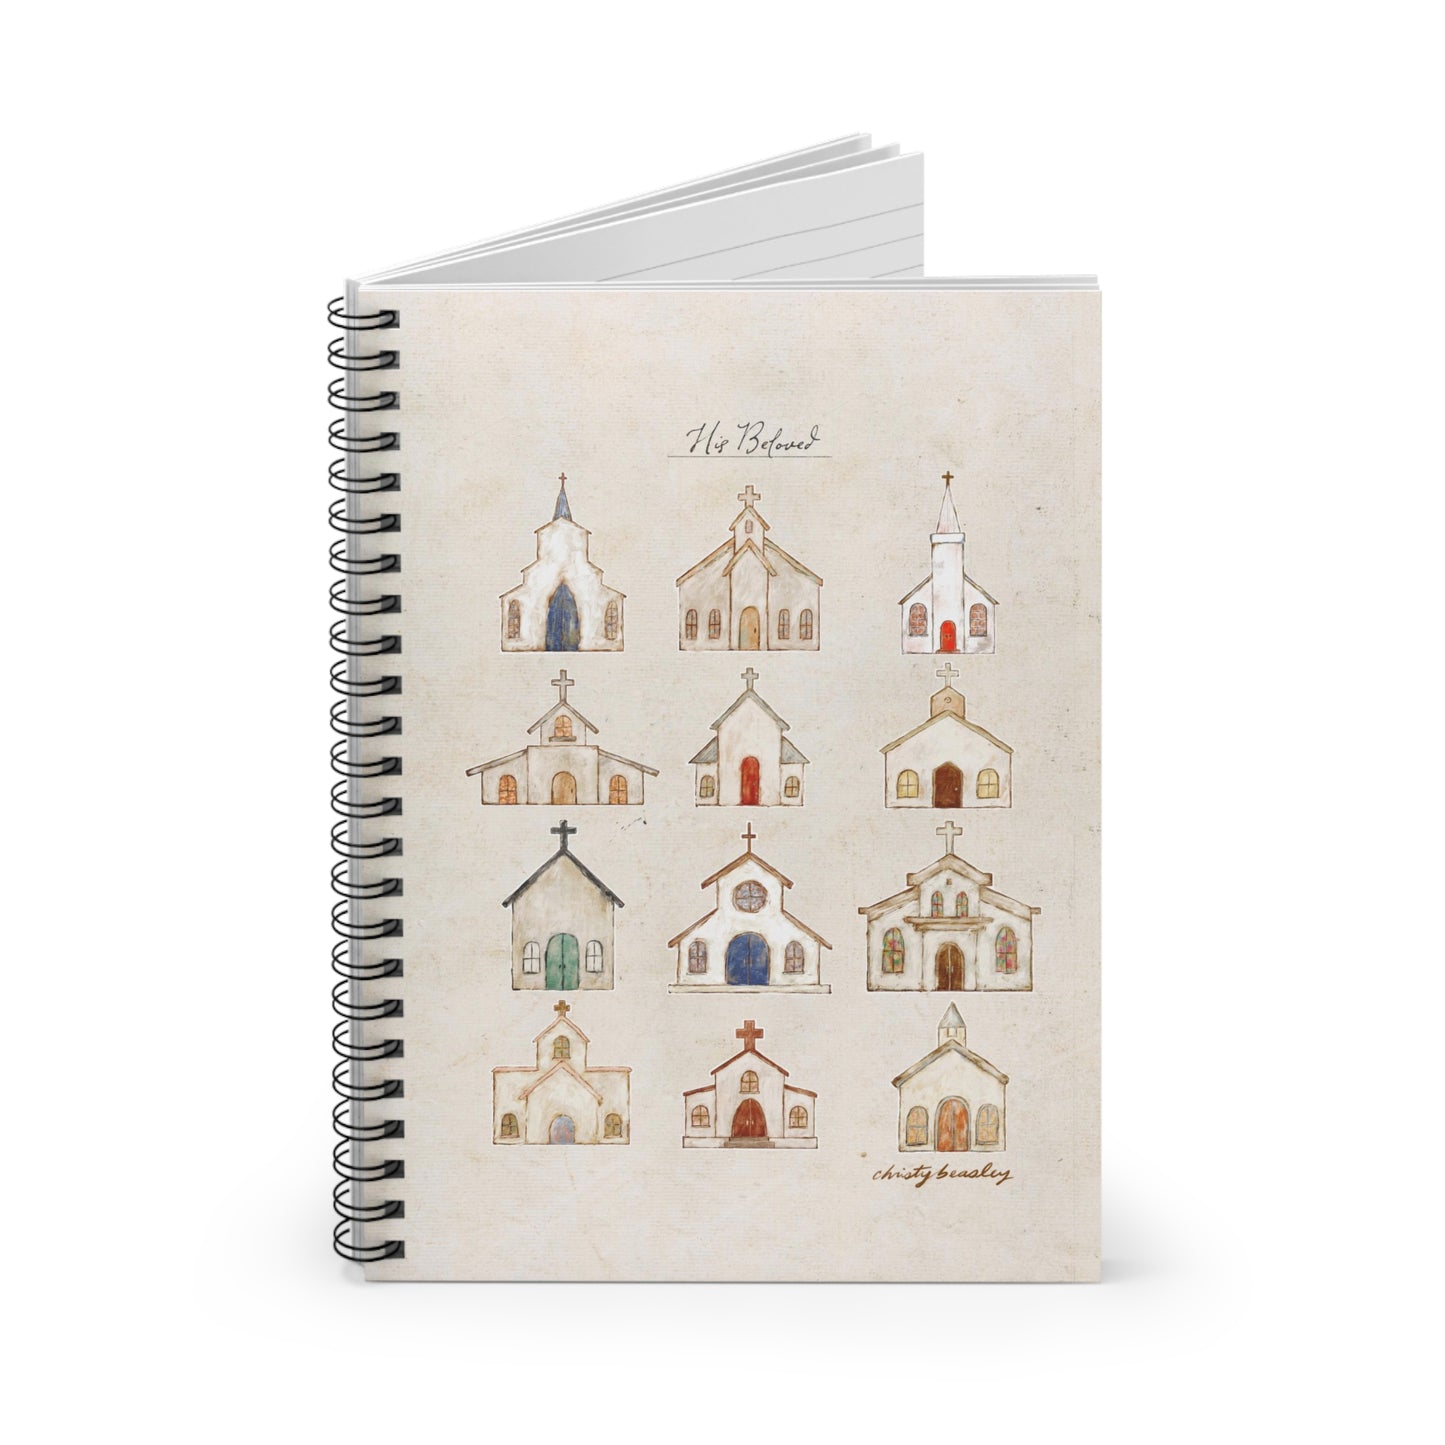 “His Beloved” Churches Spiral Notebook - Ruled Line - by Christy Beasley